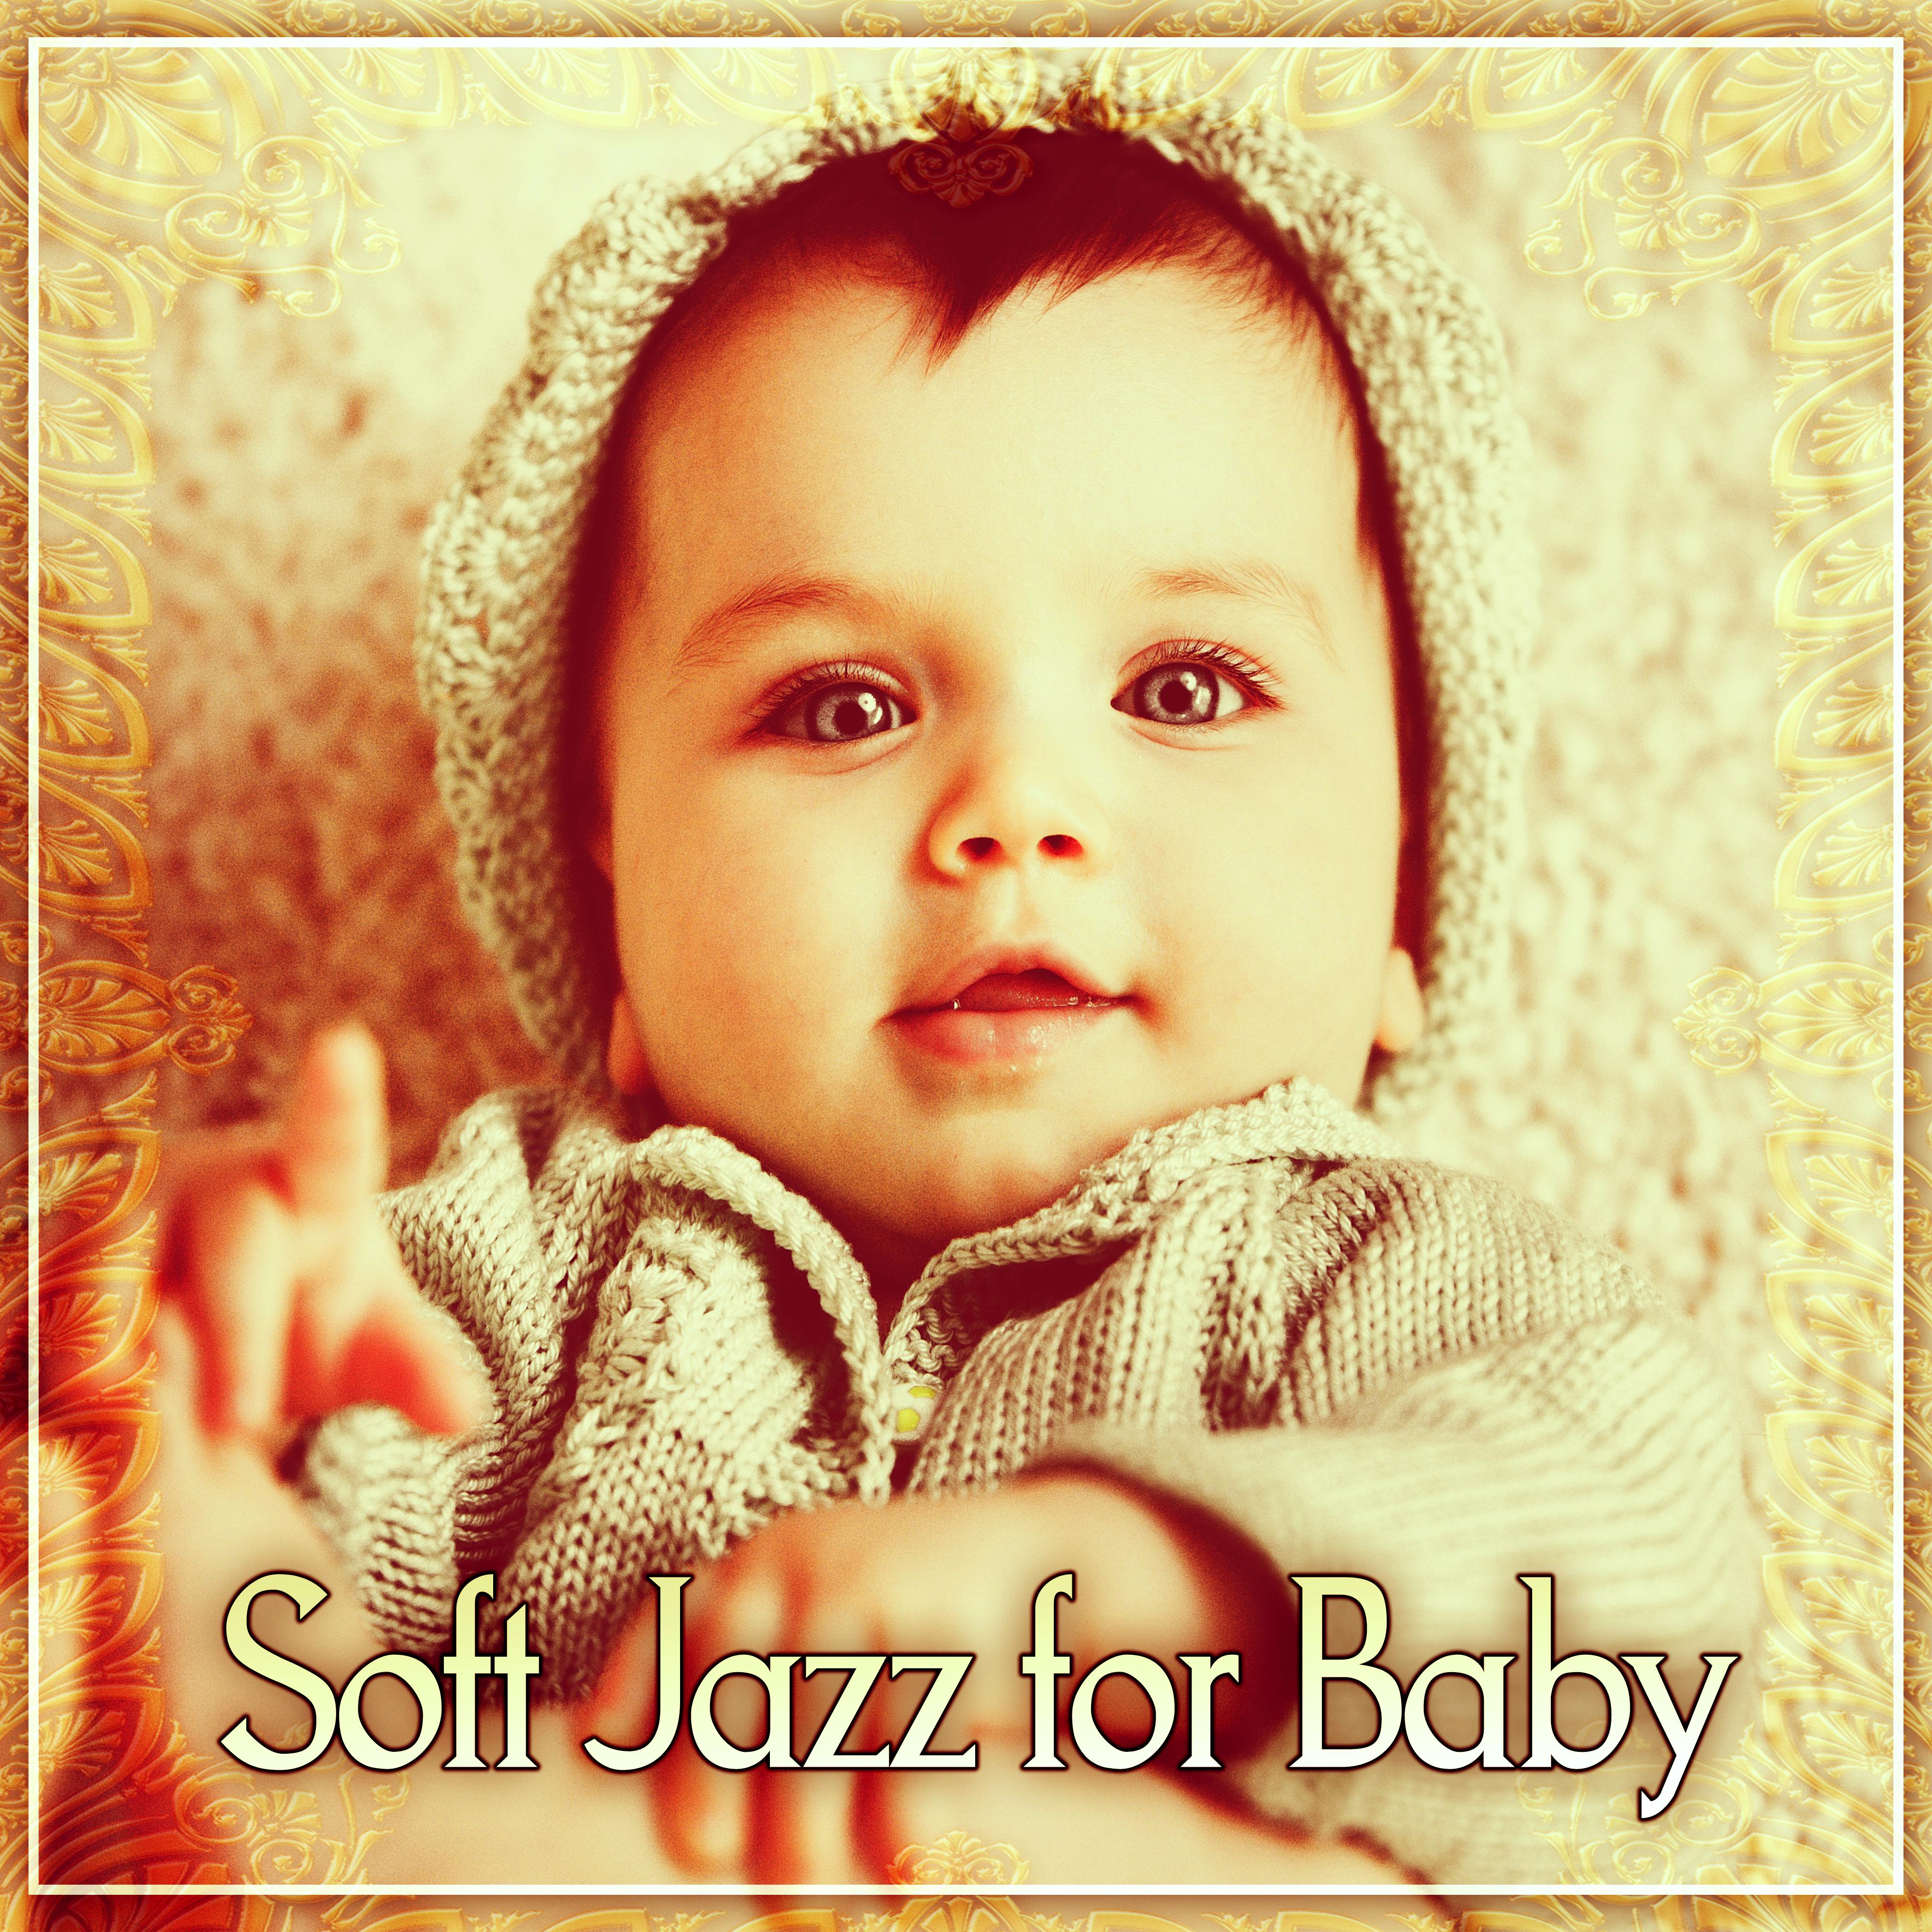 Soft Jazz for Baby – Lullaby with Jazz, Soft & Calm Music for Your Baby, Sleep My Little Angel